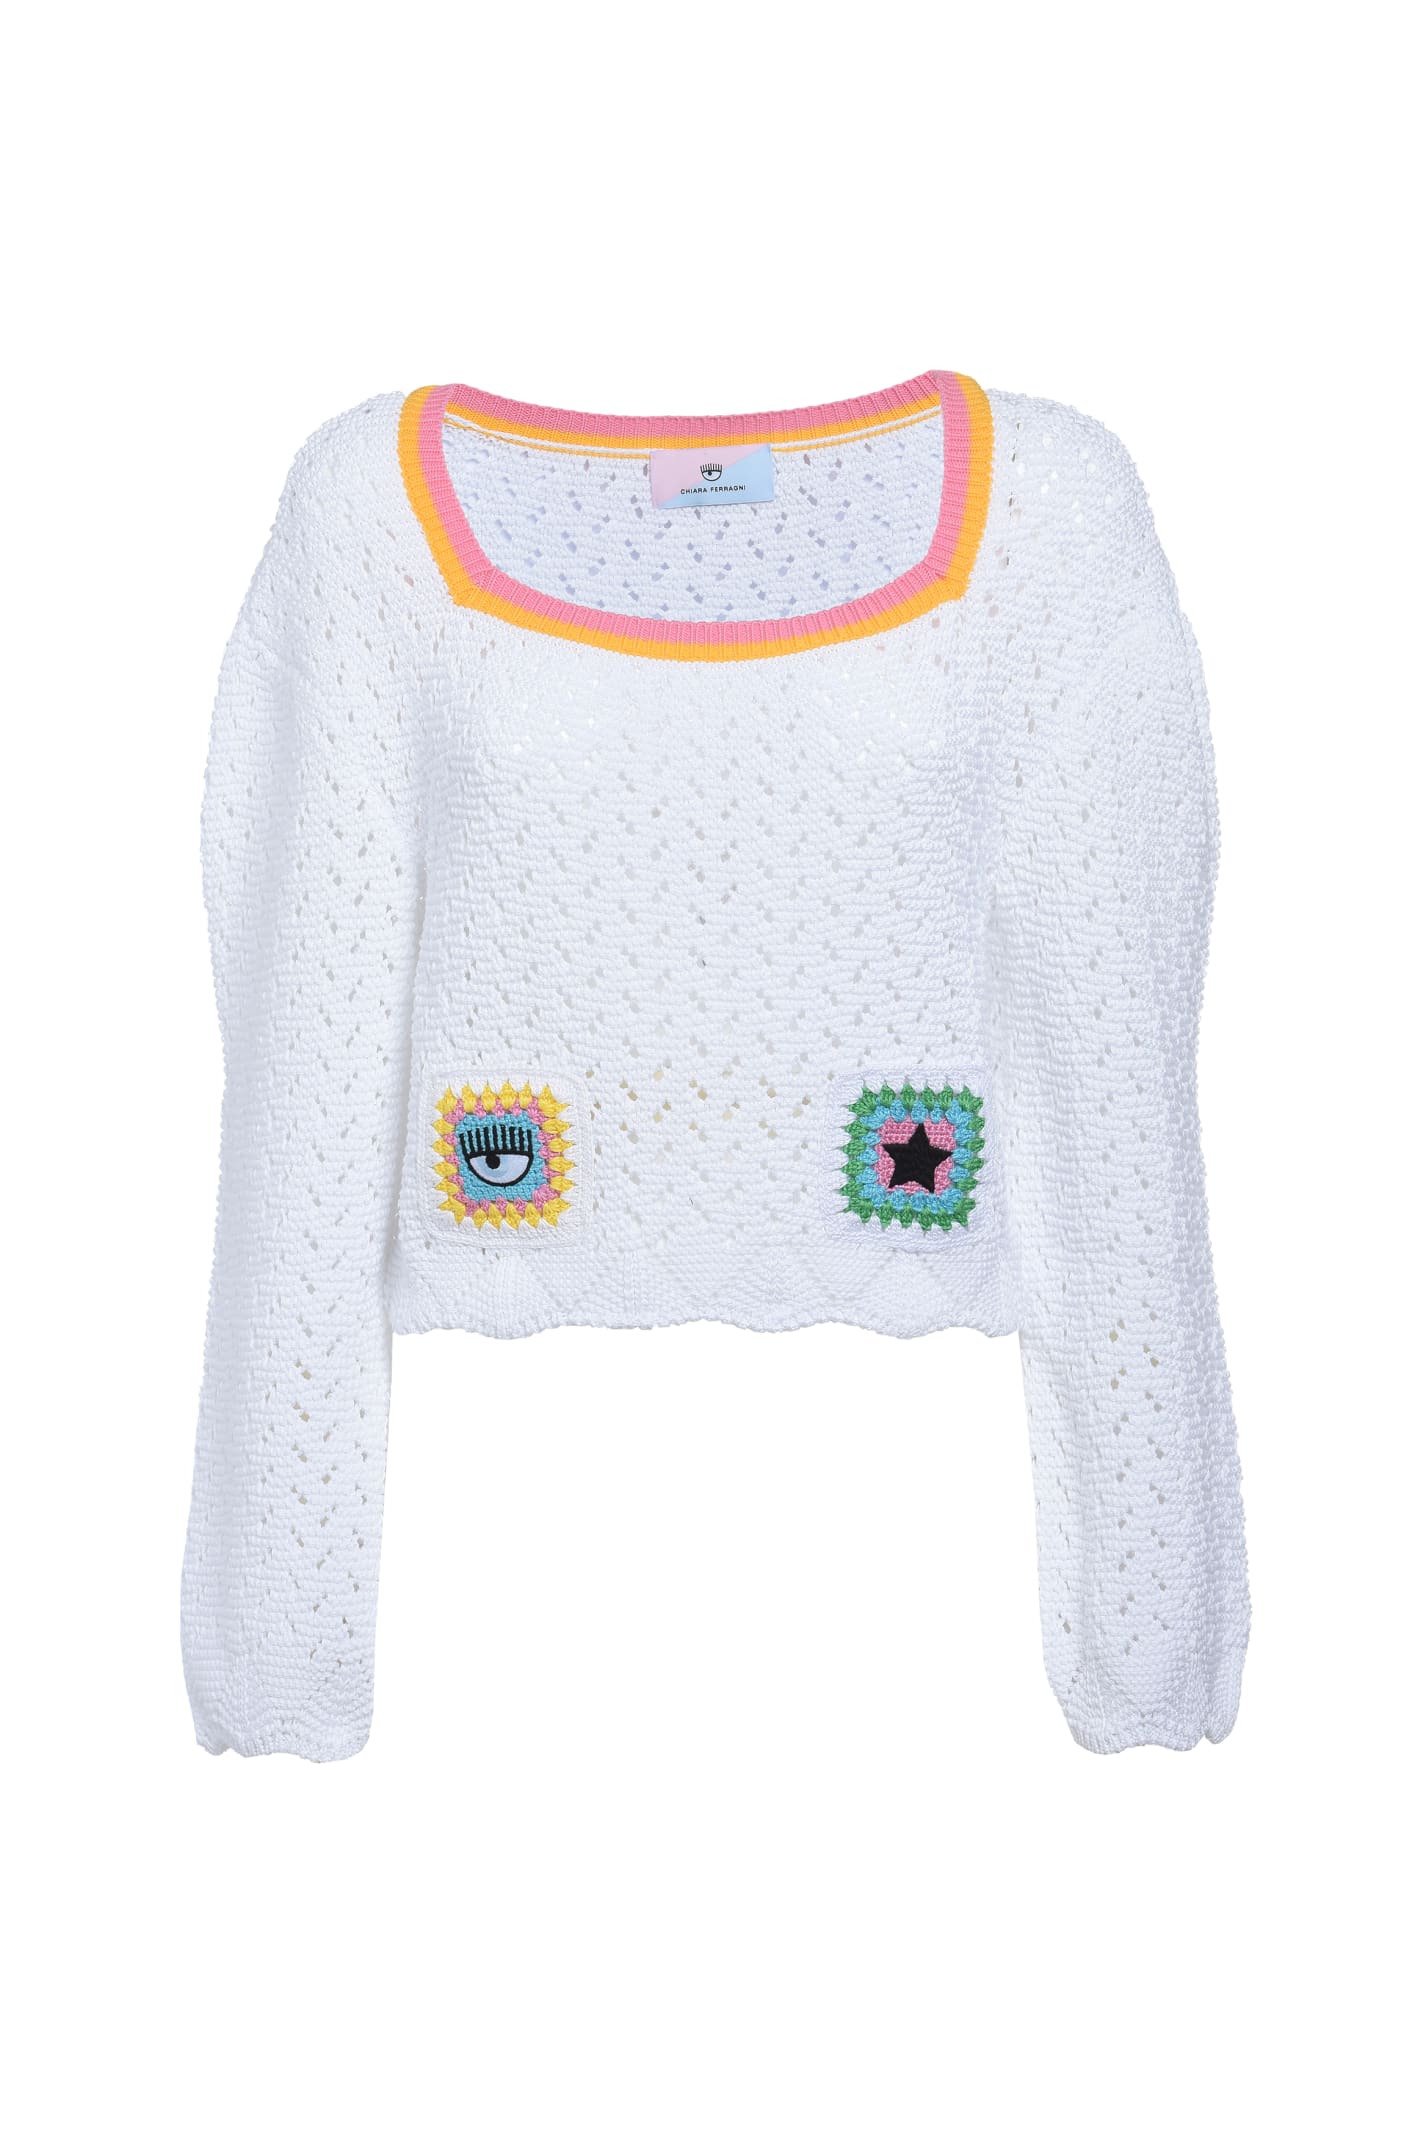 Chiara Ferragni Long-sleeved Loose Fit Crocheted Crop Top With Patch Details